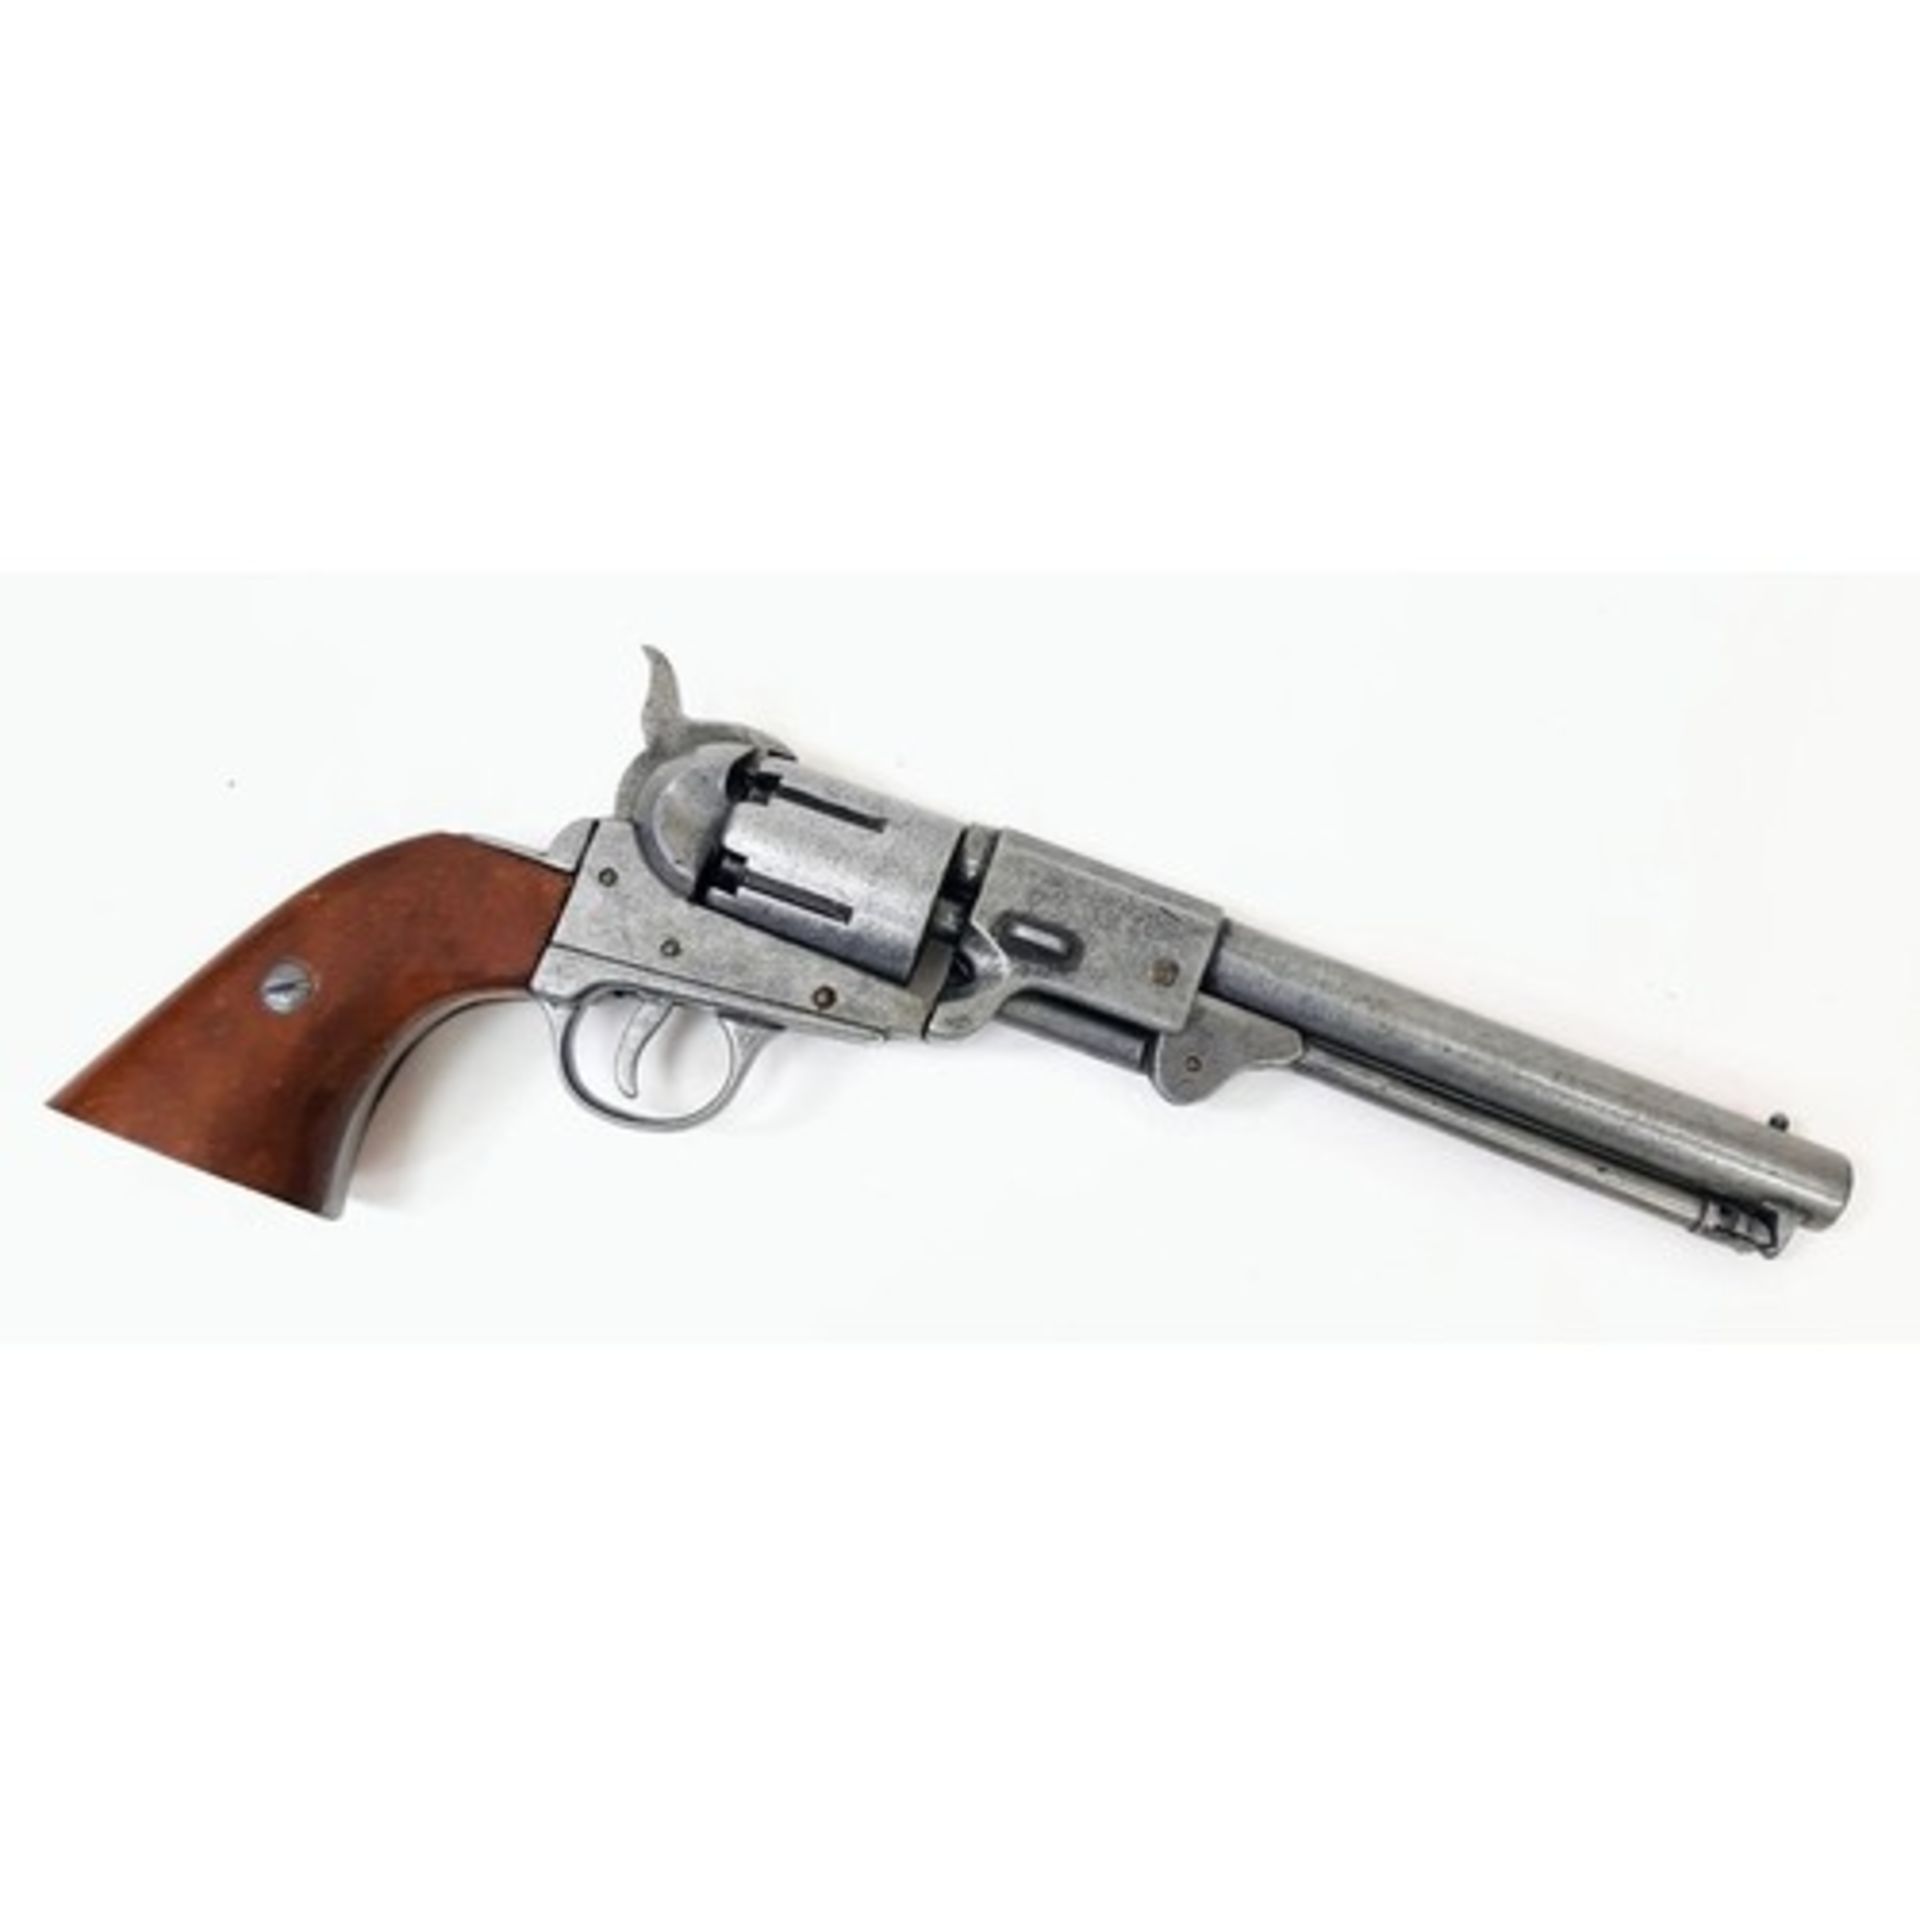 An Excellent Condition Full Size and Weight Quality Model of a Colt 1860 Western Revolver. Wood